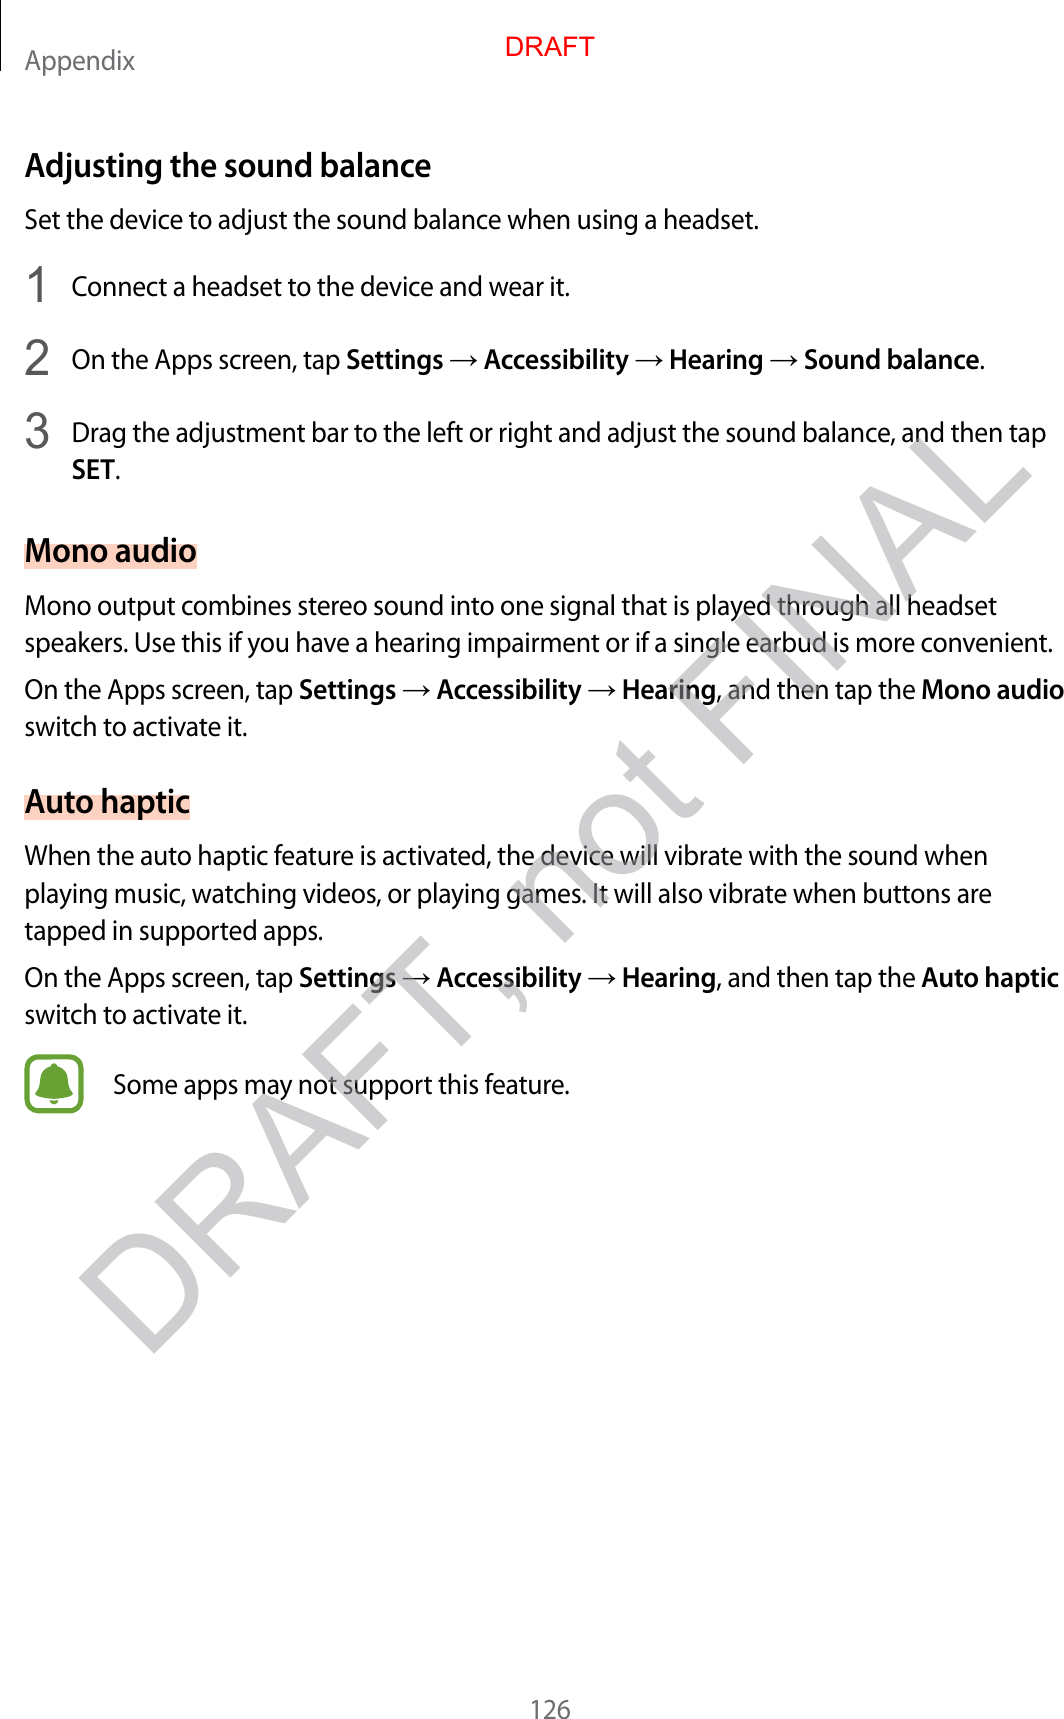 Appendix126Adjusting the sound balanceSet the device to adjust the sound balance when using a headset.1  Connect a headset to the device and wear it.2  On the Apps screen, tap Settings  Accessibility  Hearing  Sound balance.3  Drag the adjustment bar to the left or right and adjust the sound balance, and then tap SET.Mono audioMono output combines stereo sound into one signal that is played through all headset speakers. Use this if you have a hearing impairment or if a single earbud is more convenient.On the Apps screen, tap Settings  Accessibility  Hearing, and then tap the Mono audio switch to activate it.Auto hapticWhen the auto haptic feature is activated, the device will vibrate with the sound when playing music, watching videos, or playing games. It will also vibrate when buttons are tapped in supported apps.On the Apps screen, tap Settings  Accessibility  Hearing, and then tap the Auto haptic switch to activate it.Some apps may not support this feature.DRAFTDRAFT, not FINAL